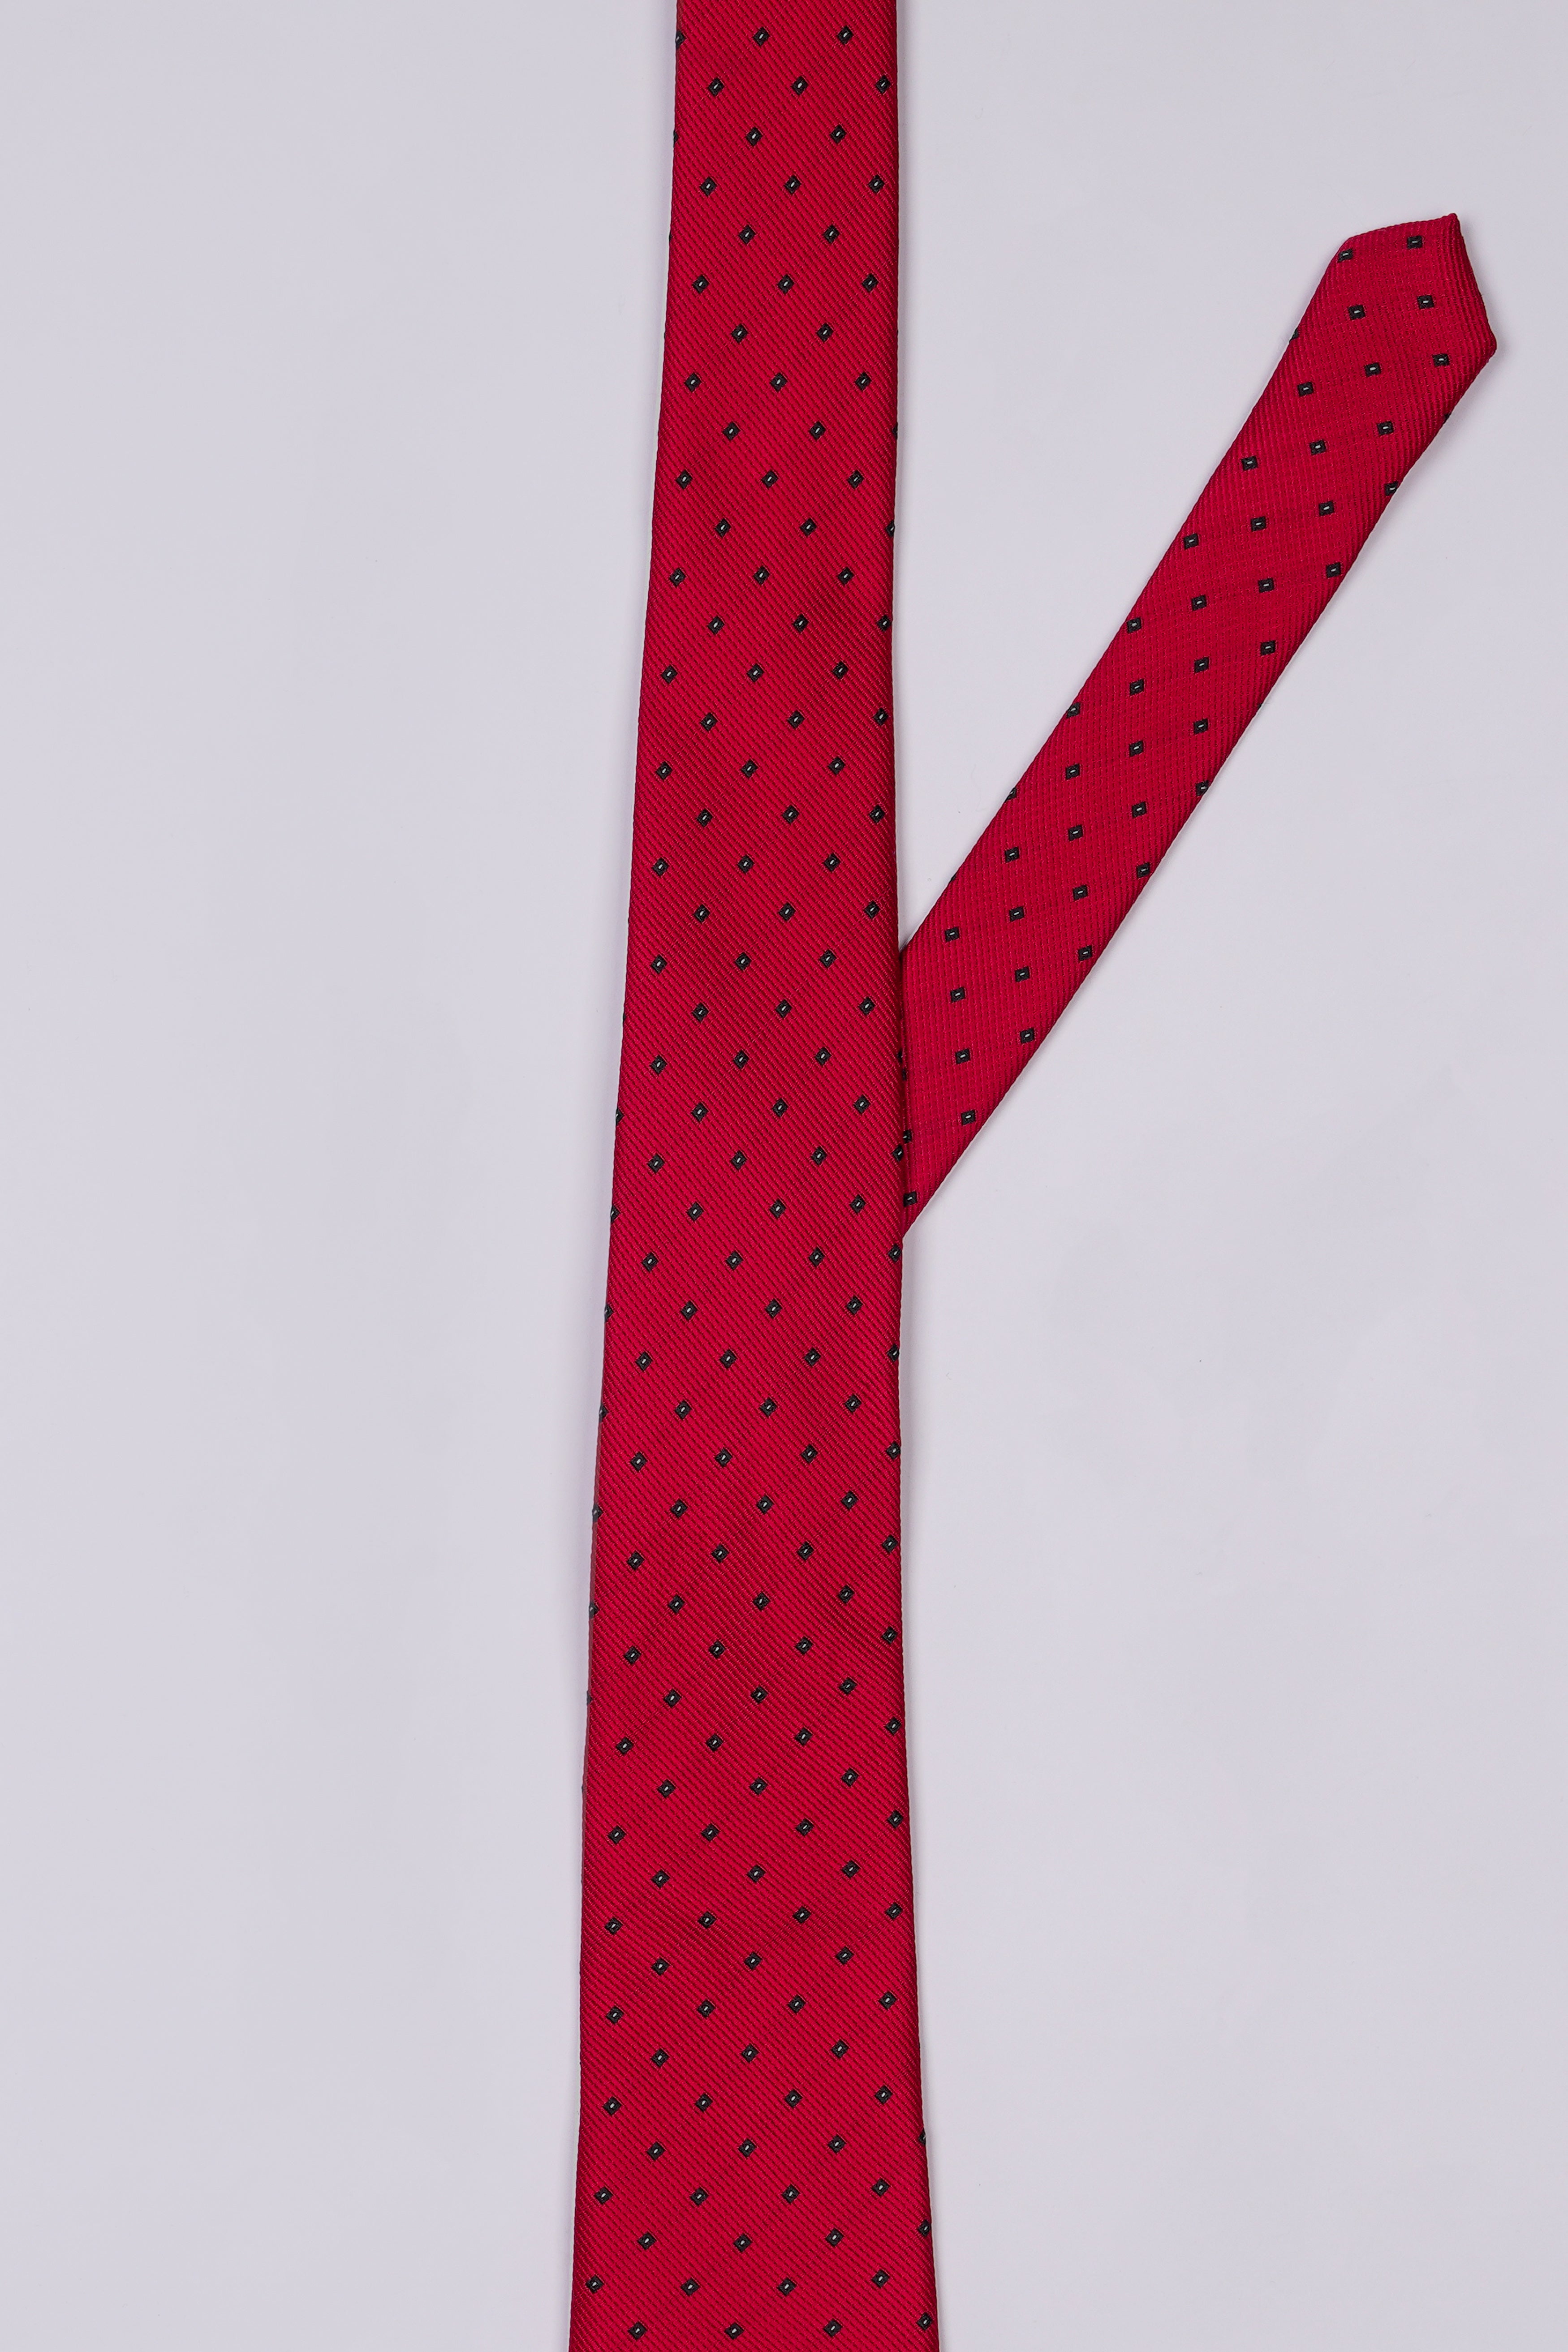 Scarlet Red with Black Jacquard Tie with Pocket Square TP063